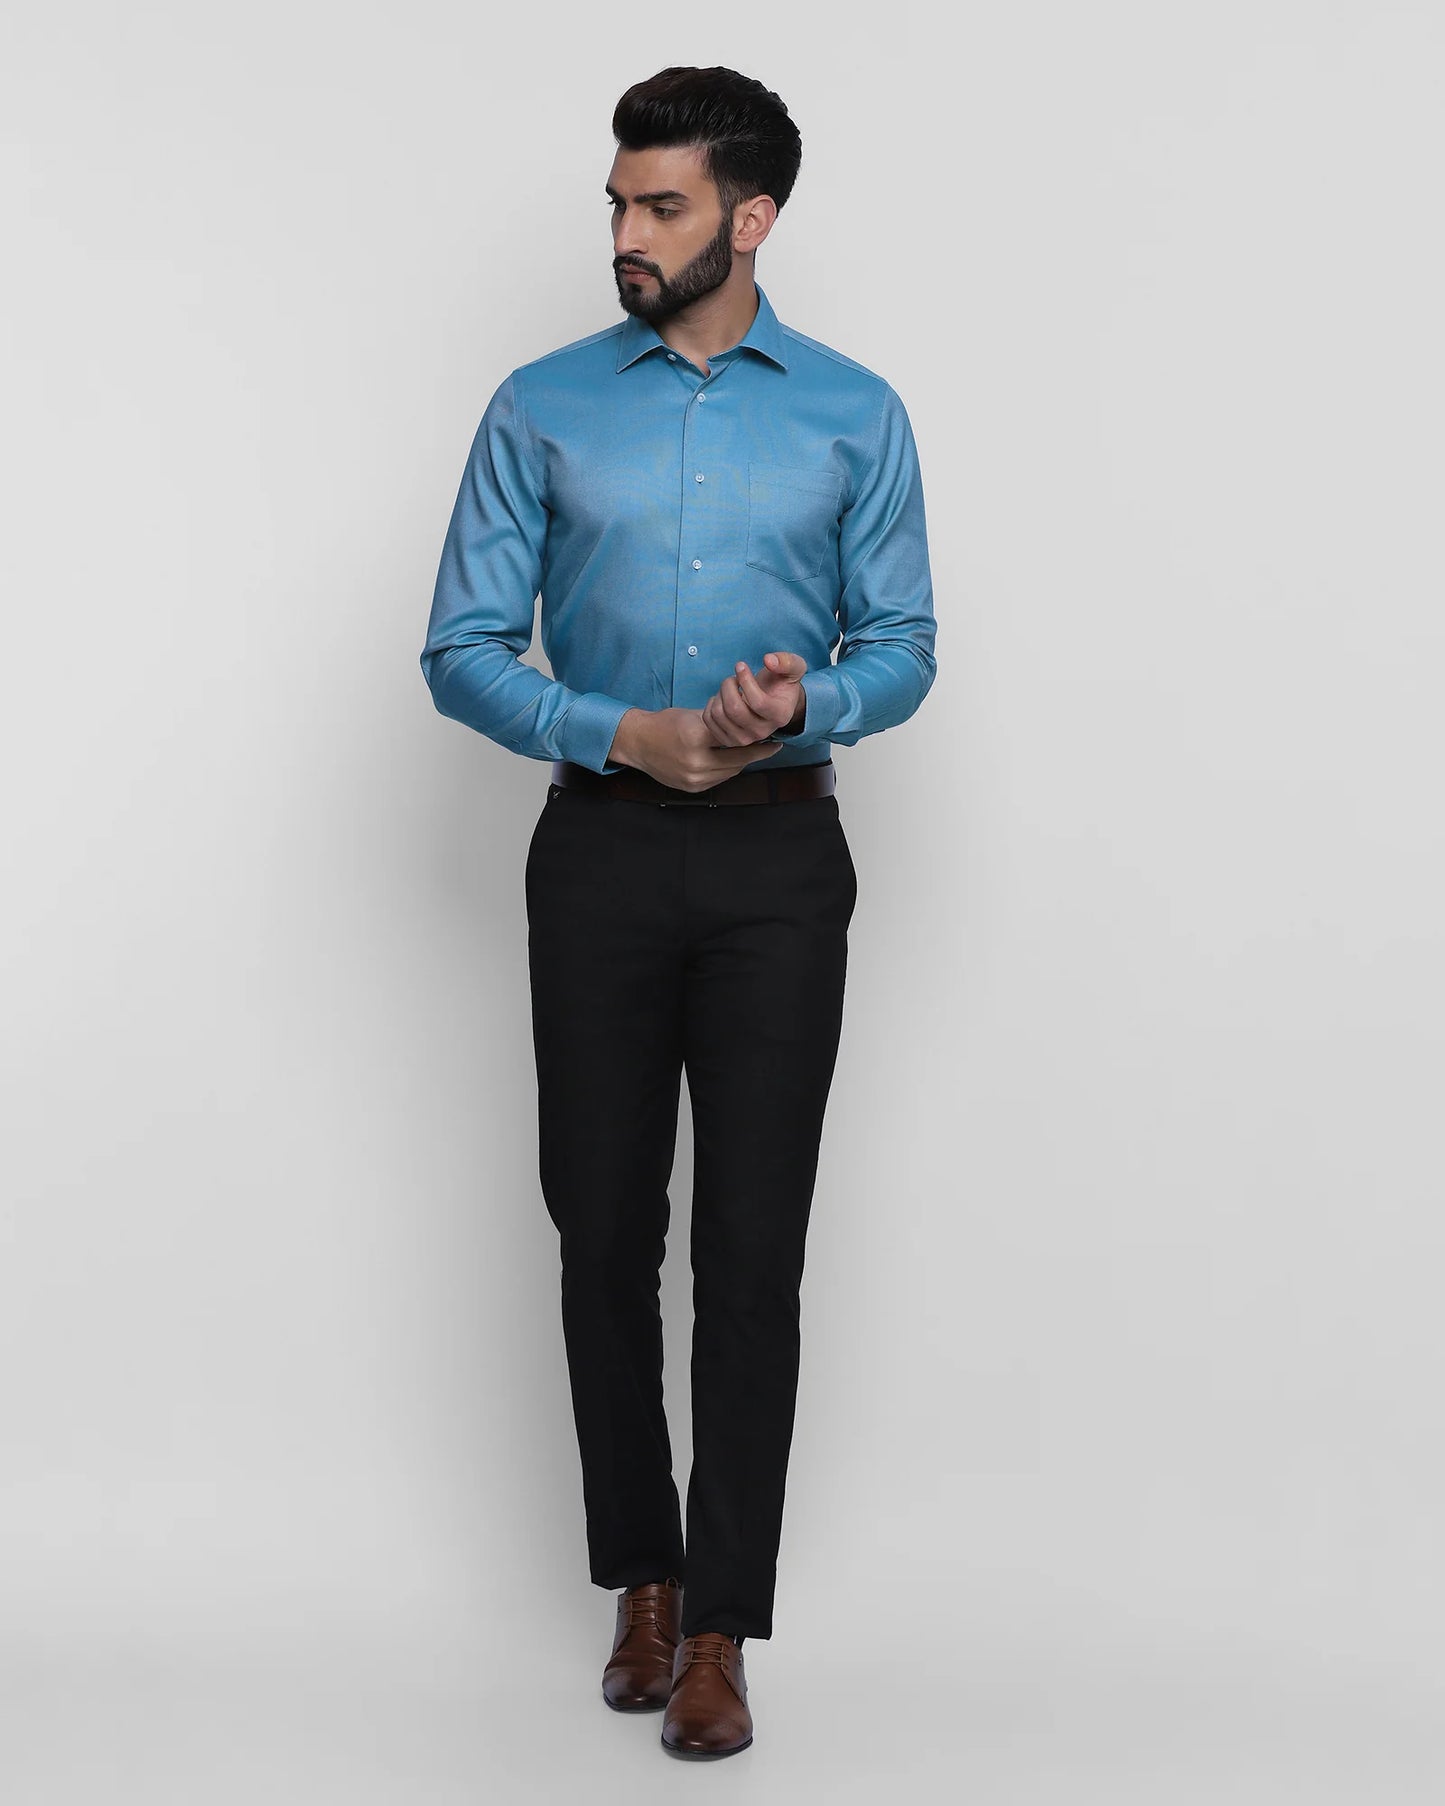 Solid formal shirt in peacock blue